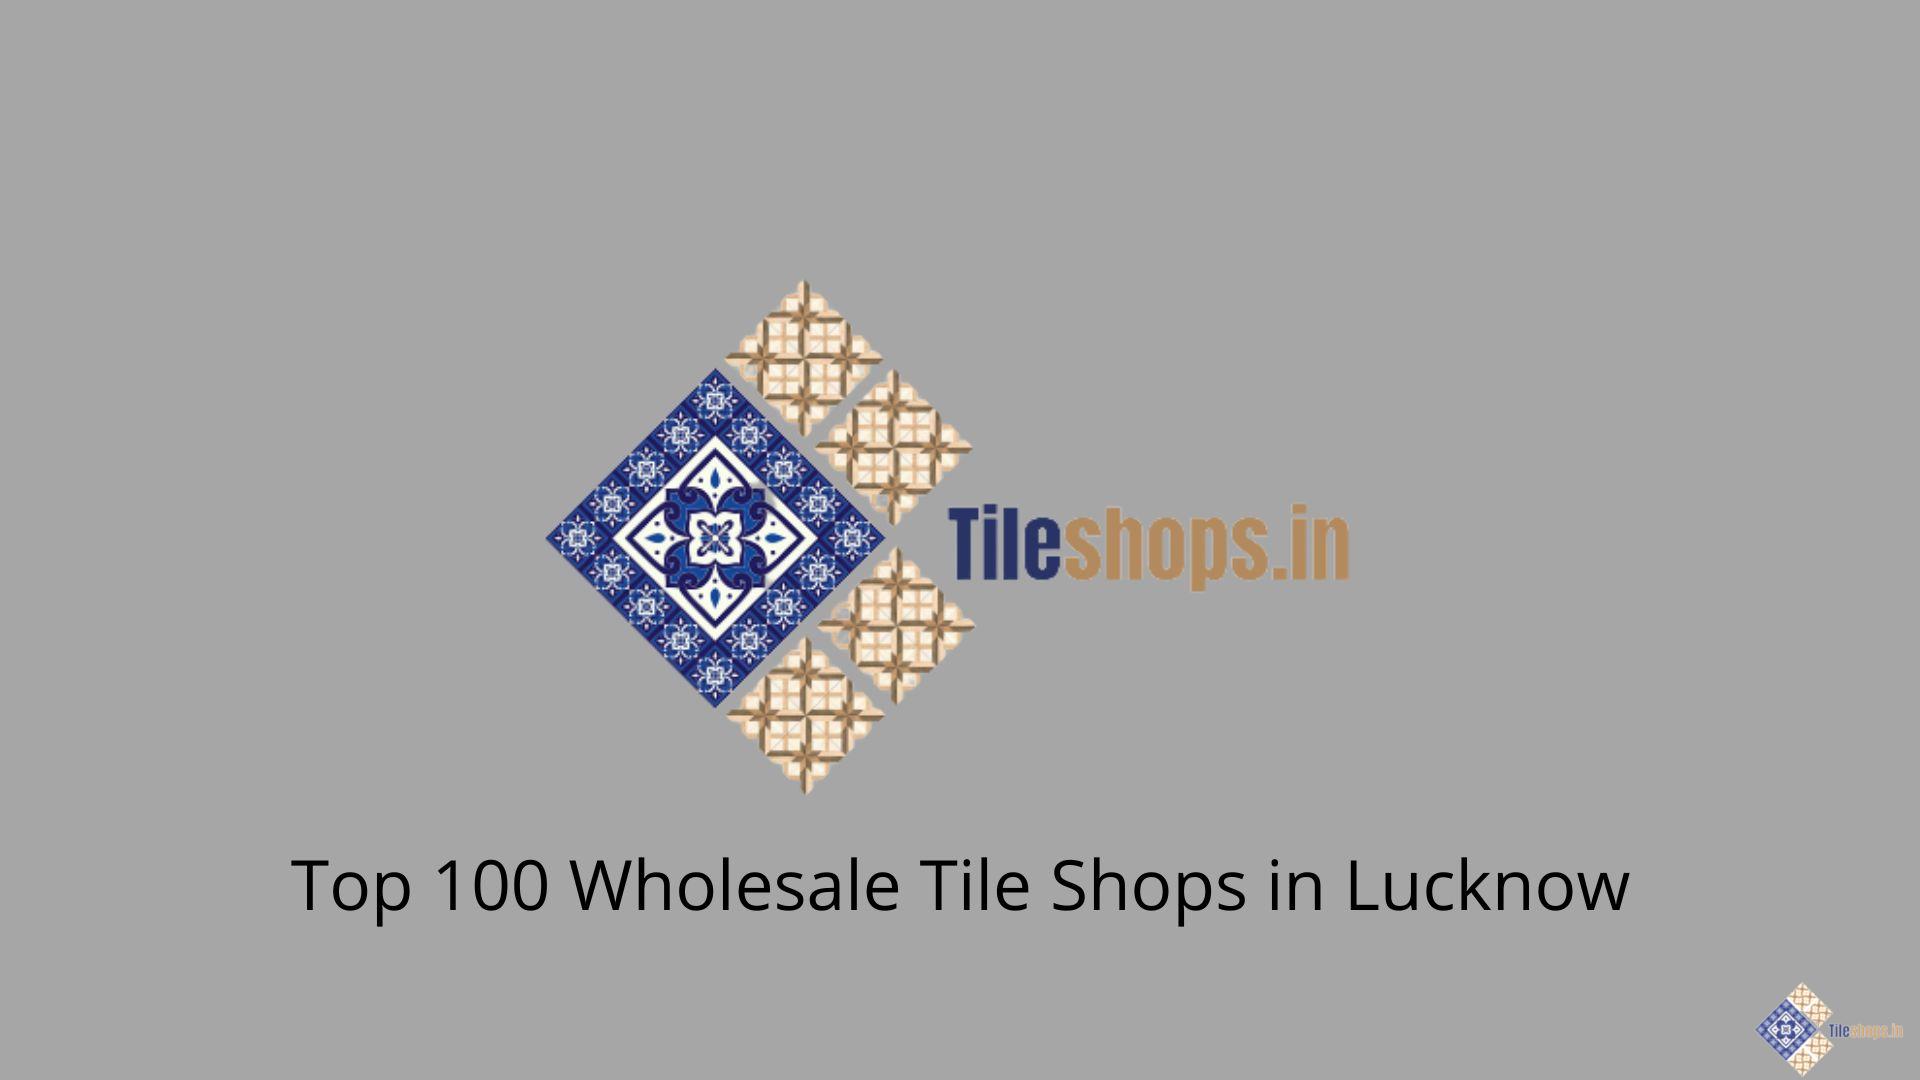 Top 100 Wholesale Tile Shops in Lucknow